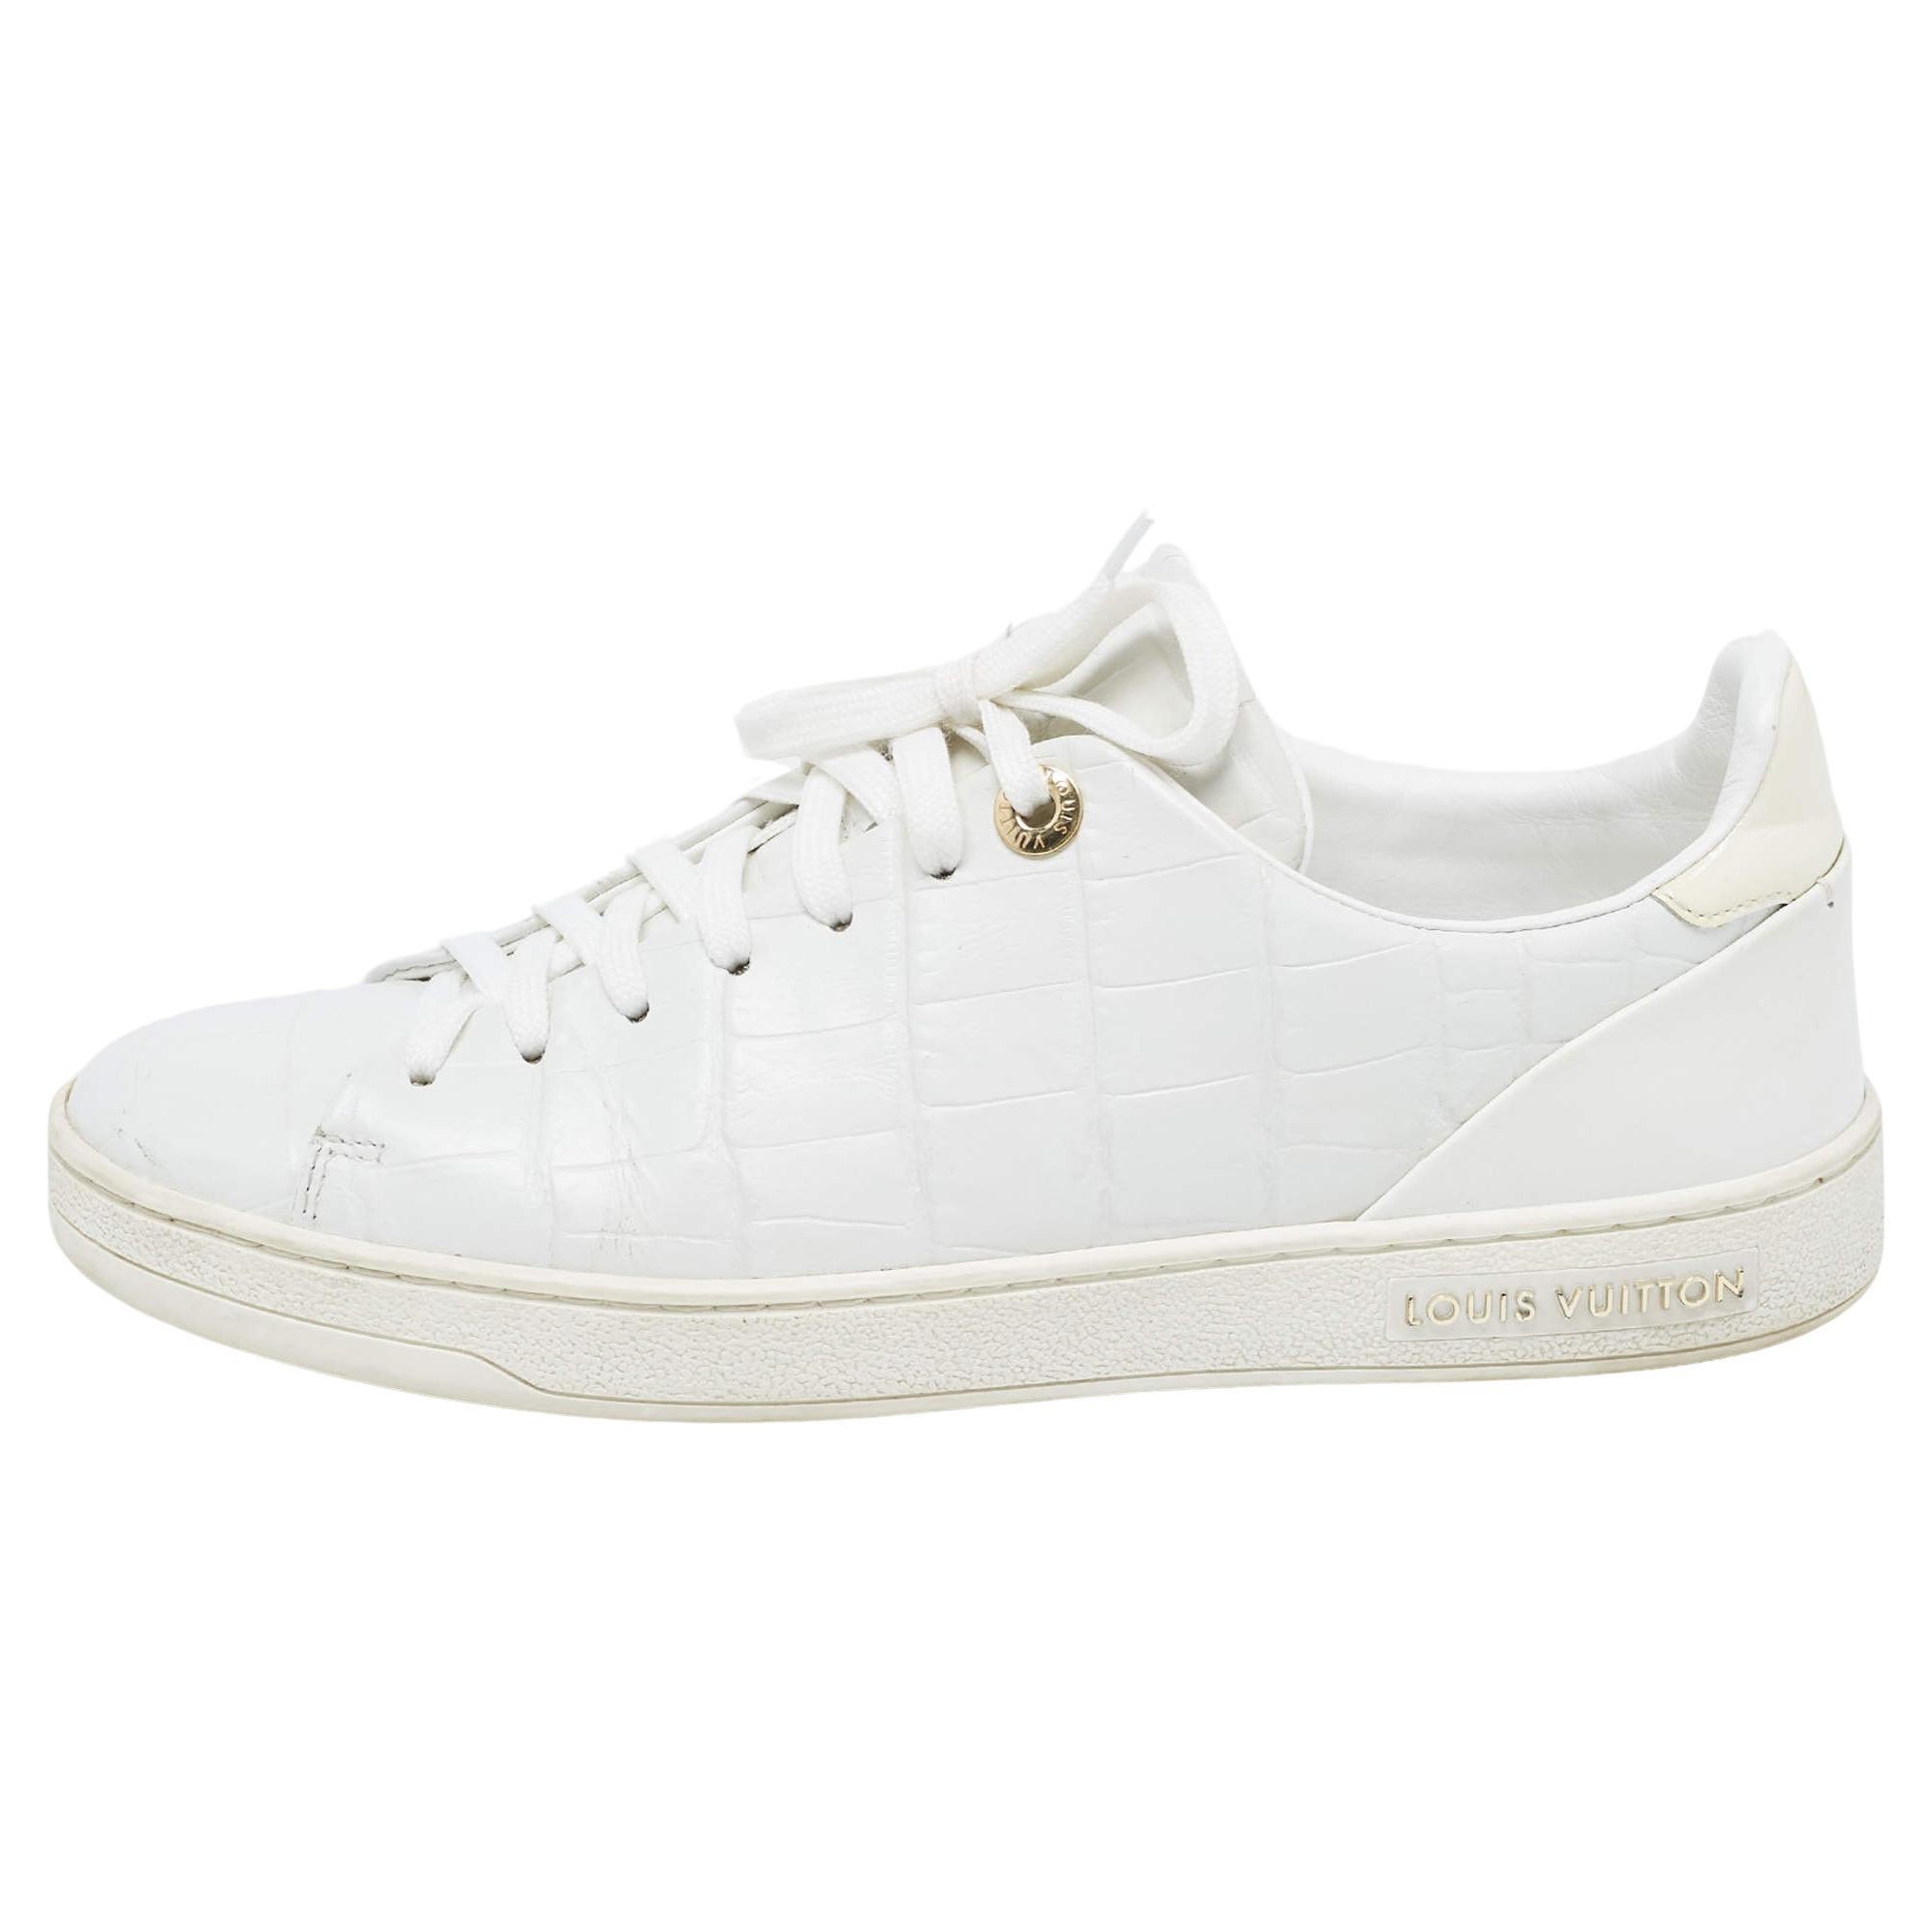 Louis Vuitton White Croc Embossed Leather Frontrow Sneakers Size 36.5 For Sale